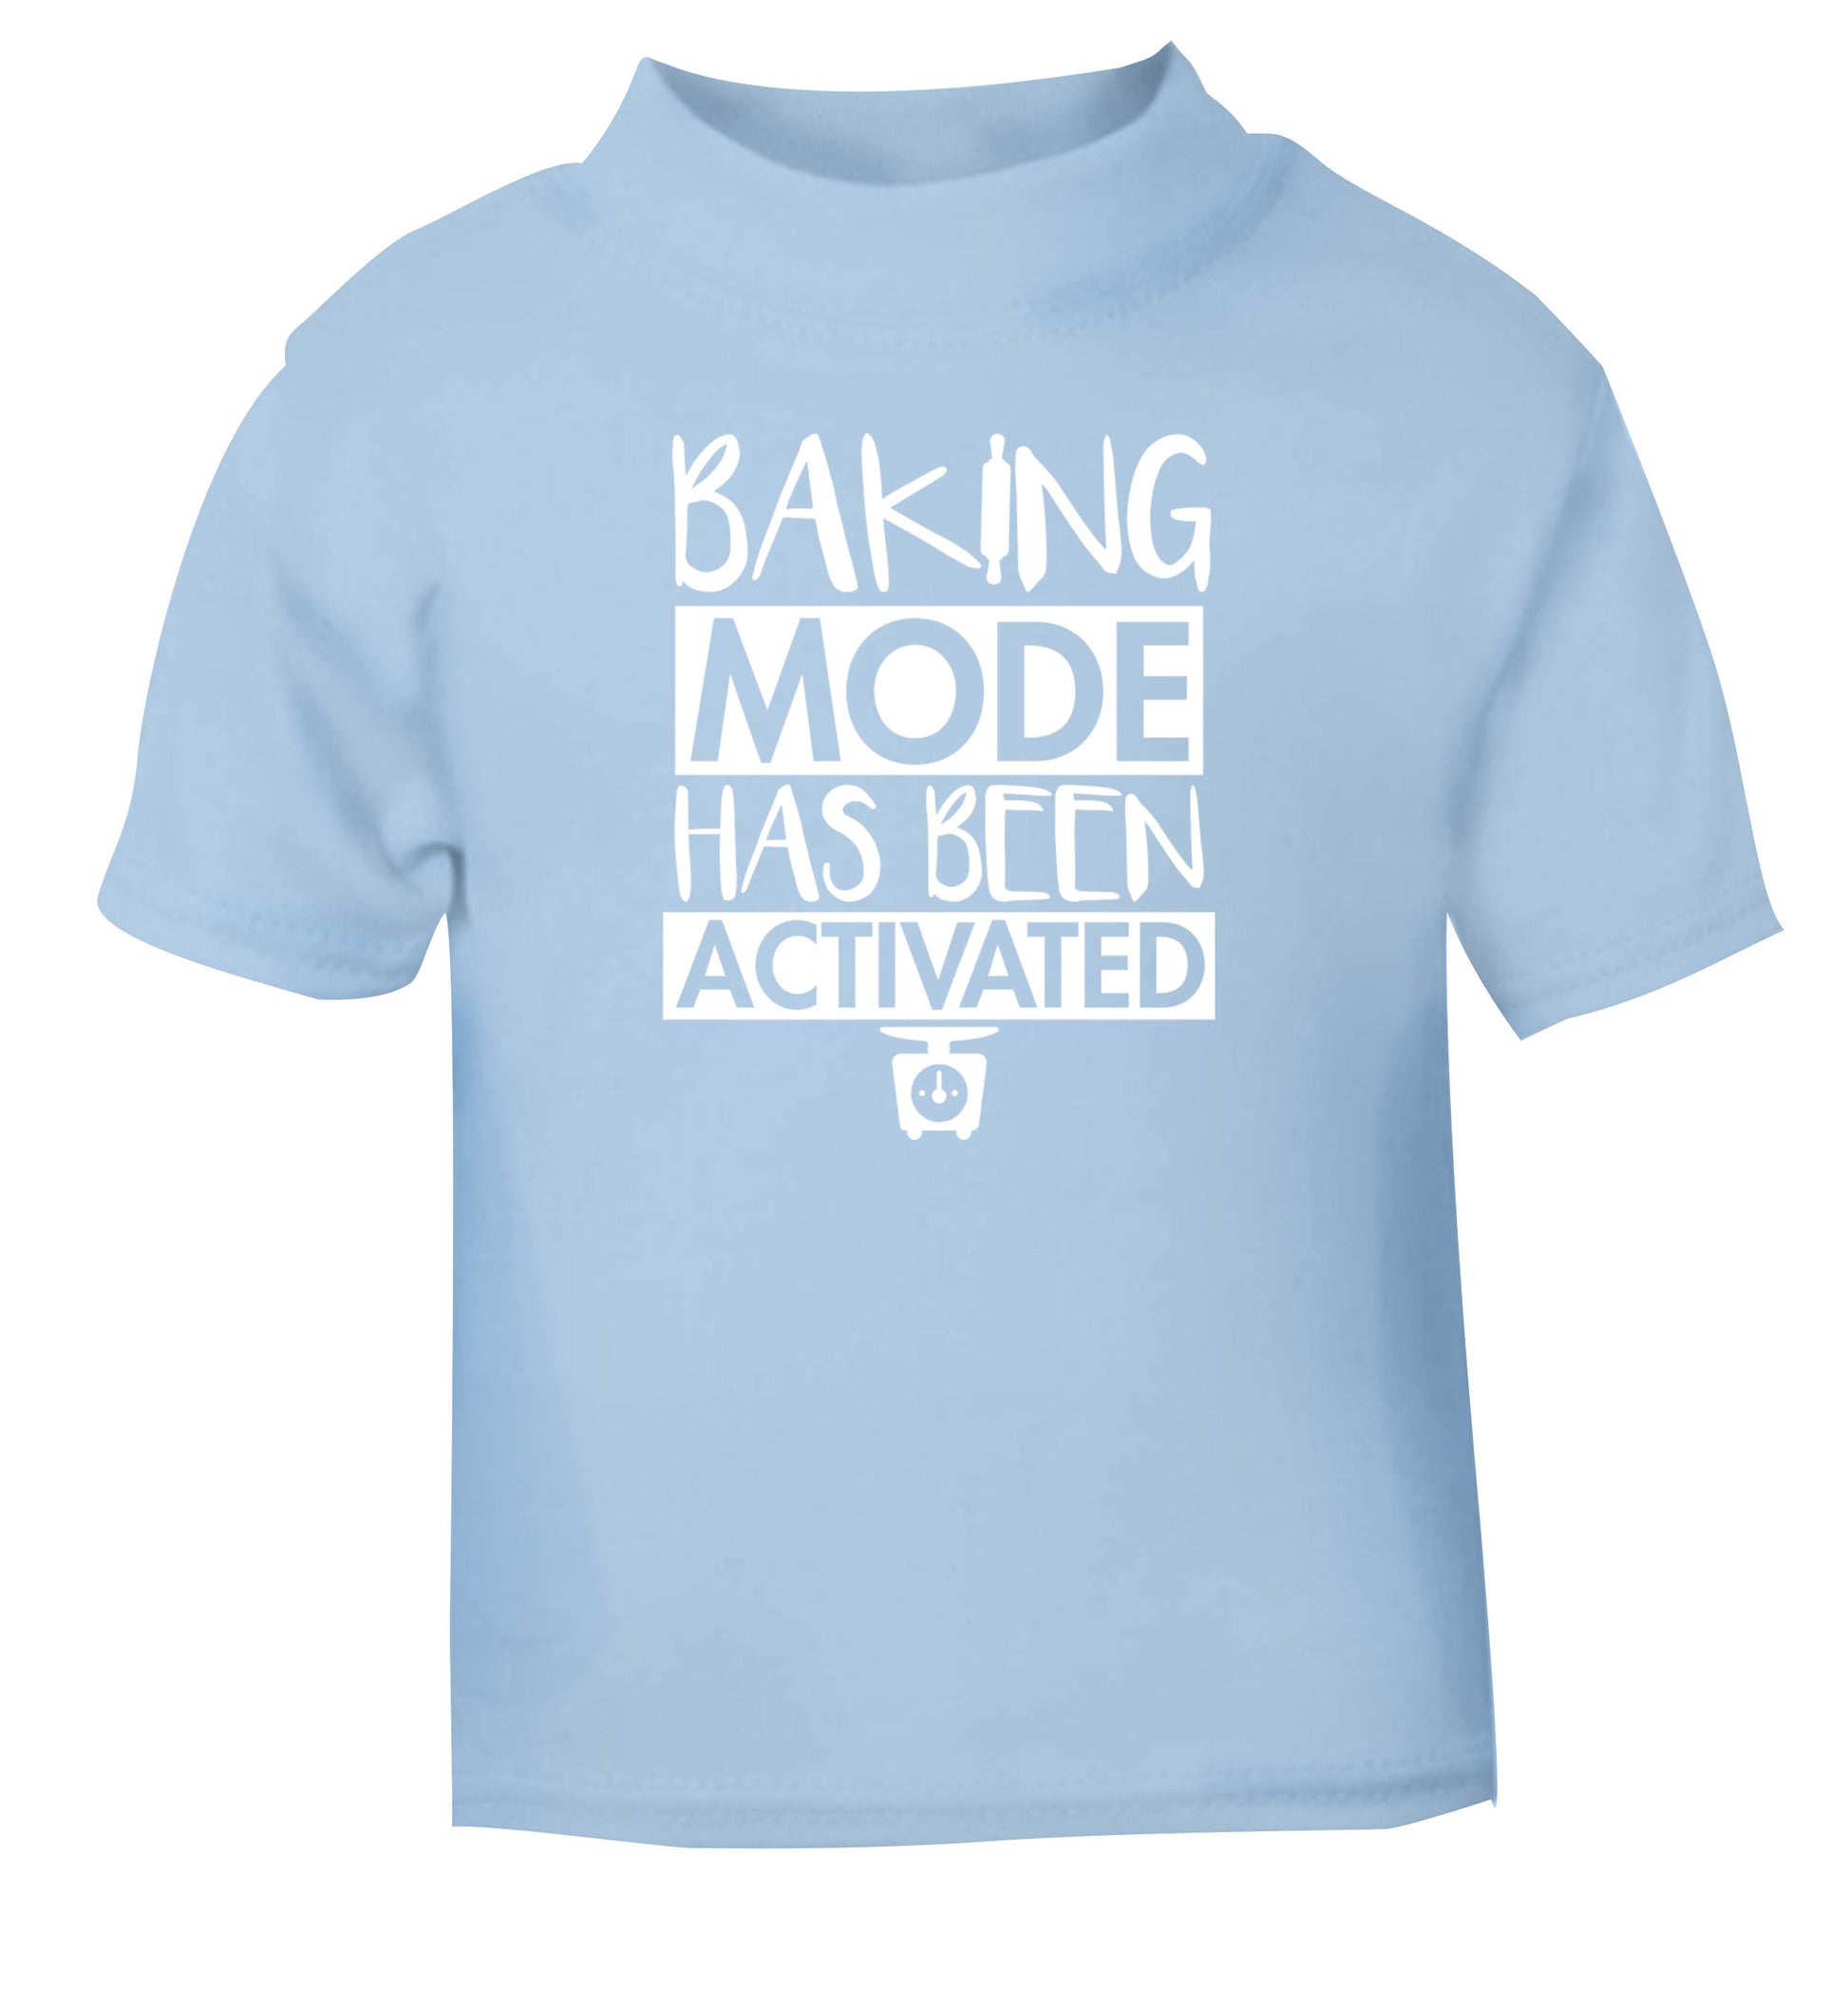 Baking mode has been activated light blue Baby Toddler Tshirt 2 Years